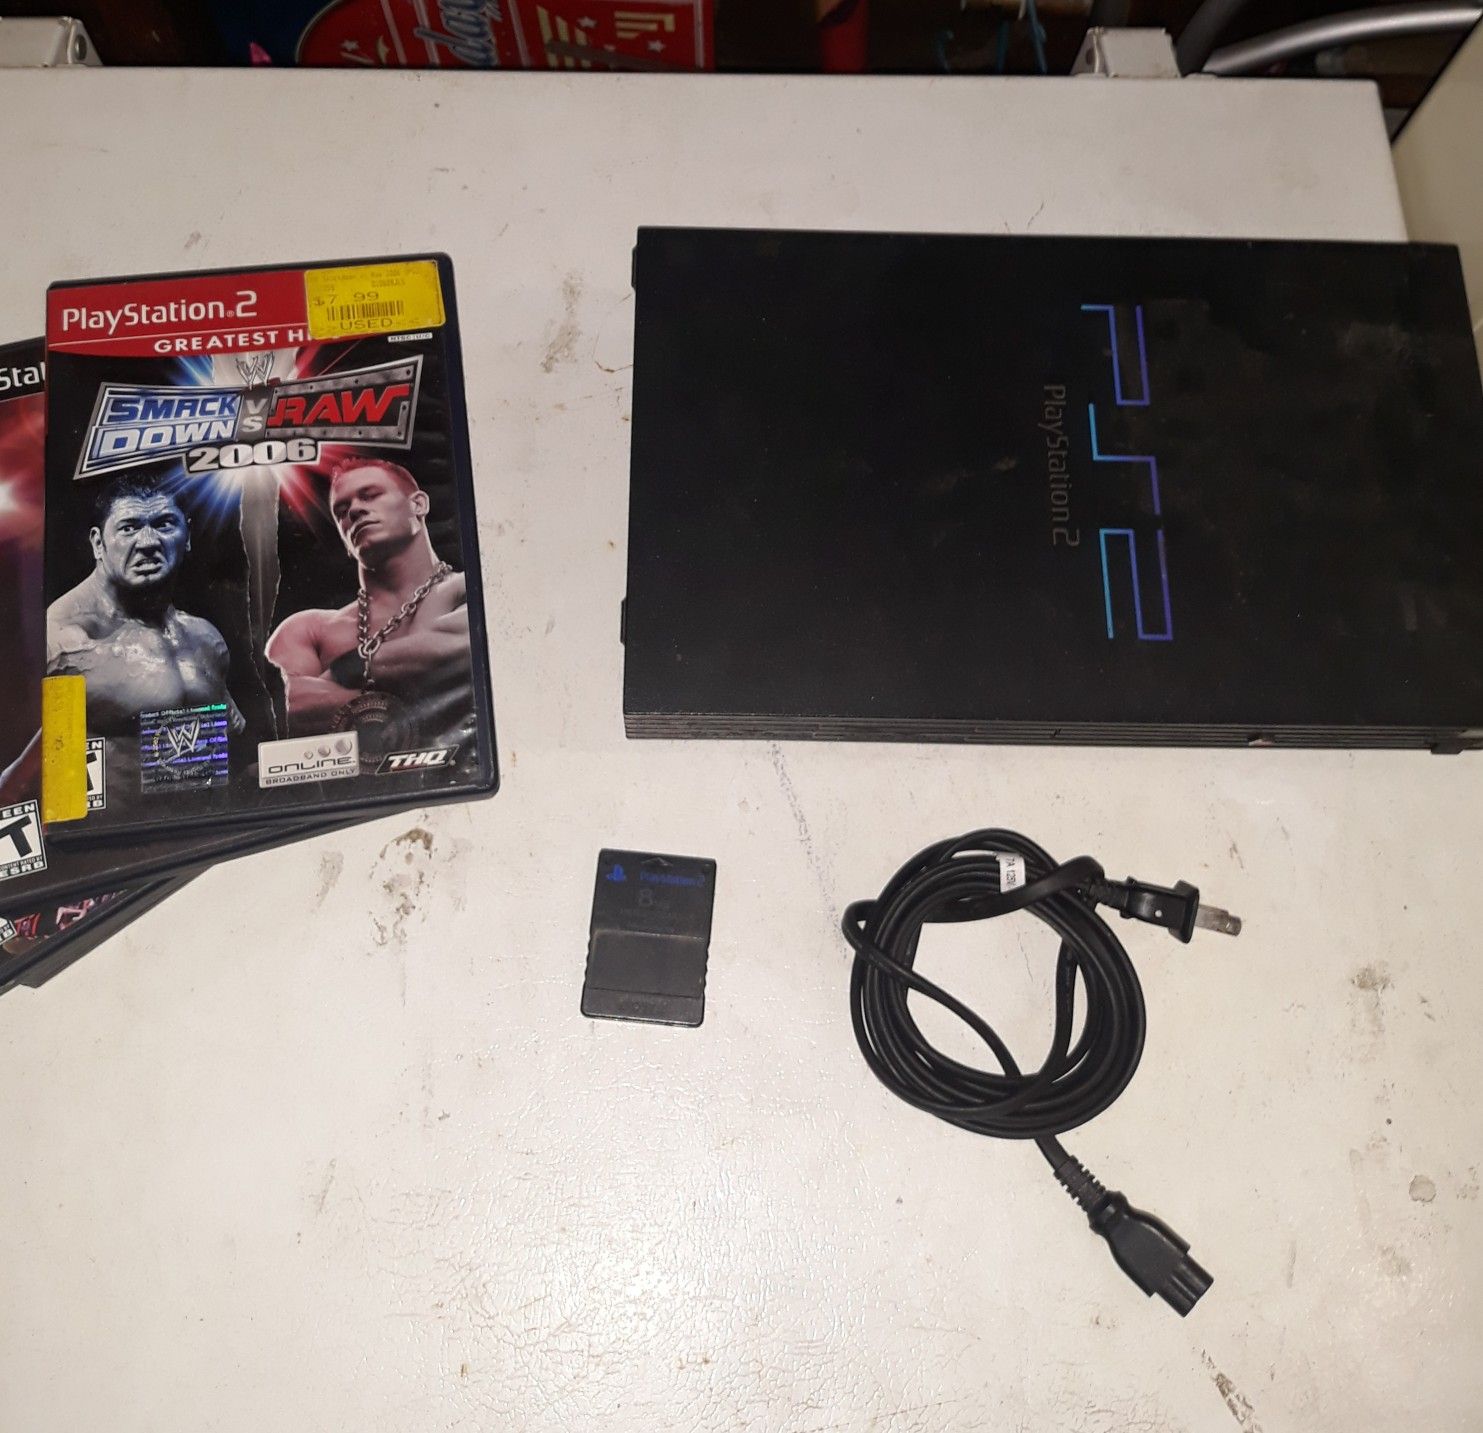 PS2 DONT HAVE CONTROLLERS OR CORD THAT GOES TO TV BUT WORKS FINE. MAKE OFFER..